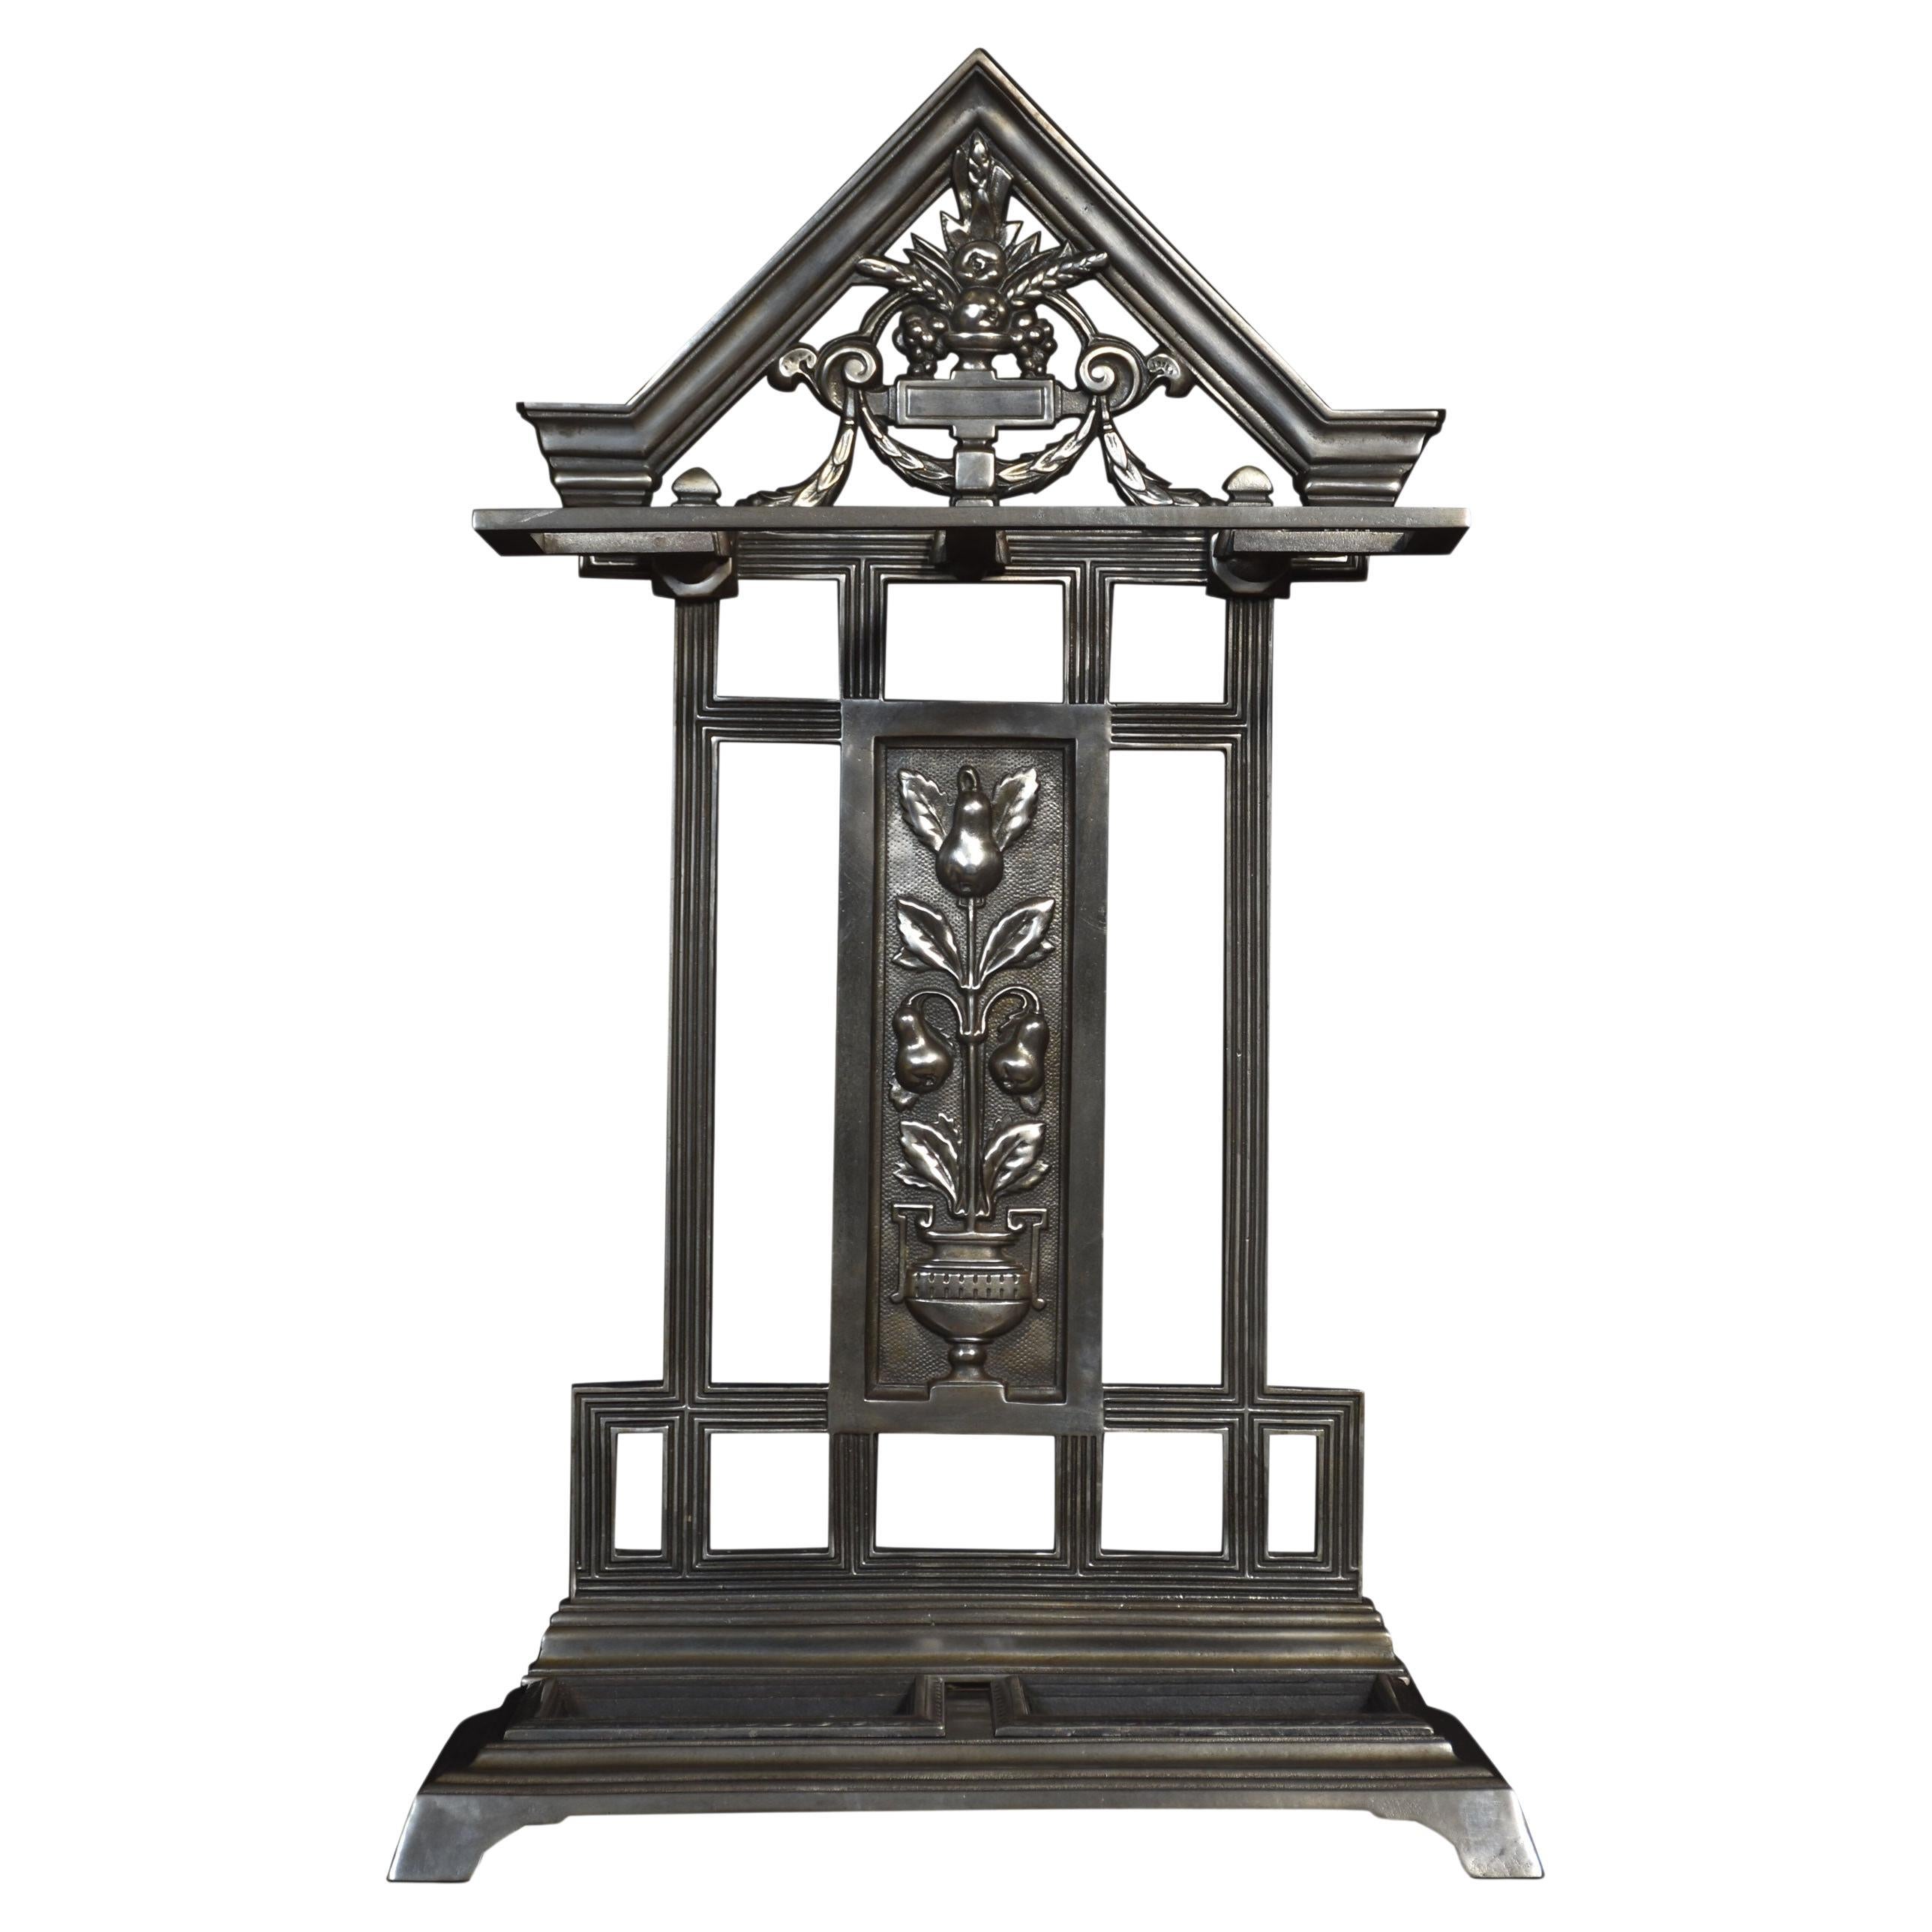 Falkirk cast iron umbrella stand For Sale